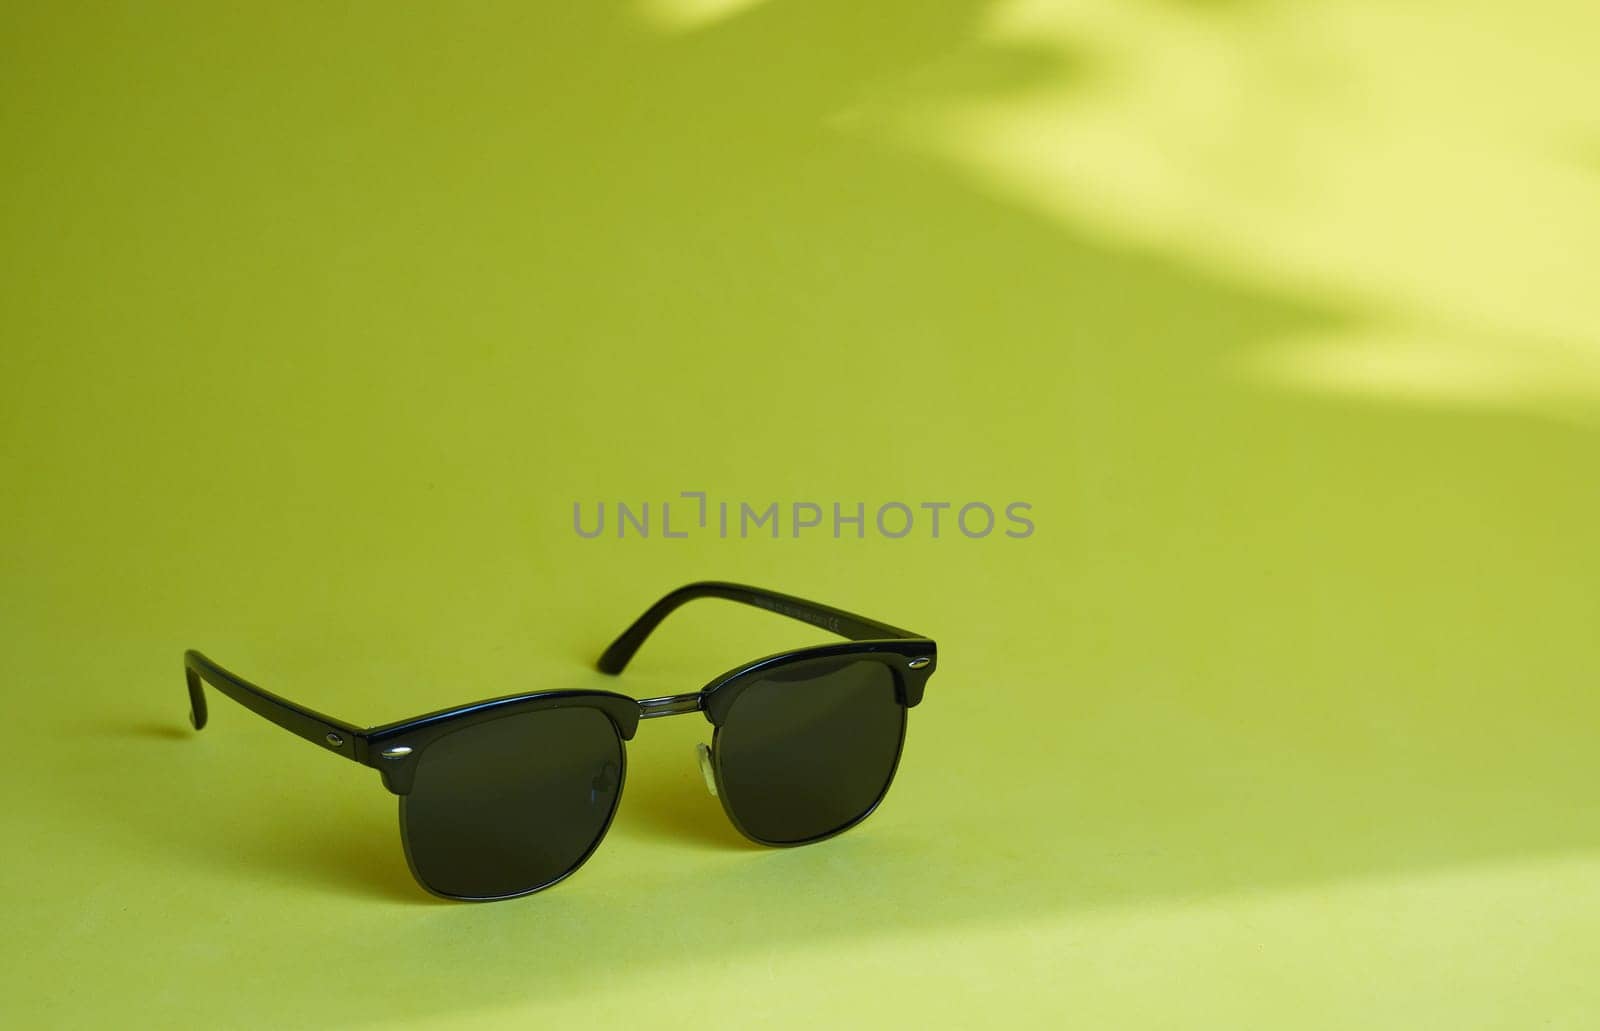 Black glasses on a light green background. Side view. Place for text.